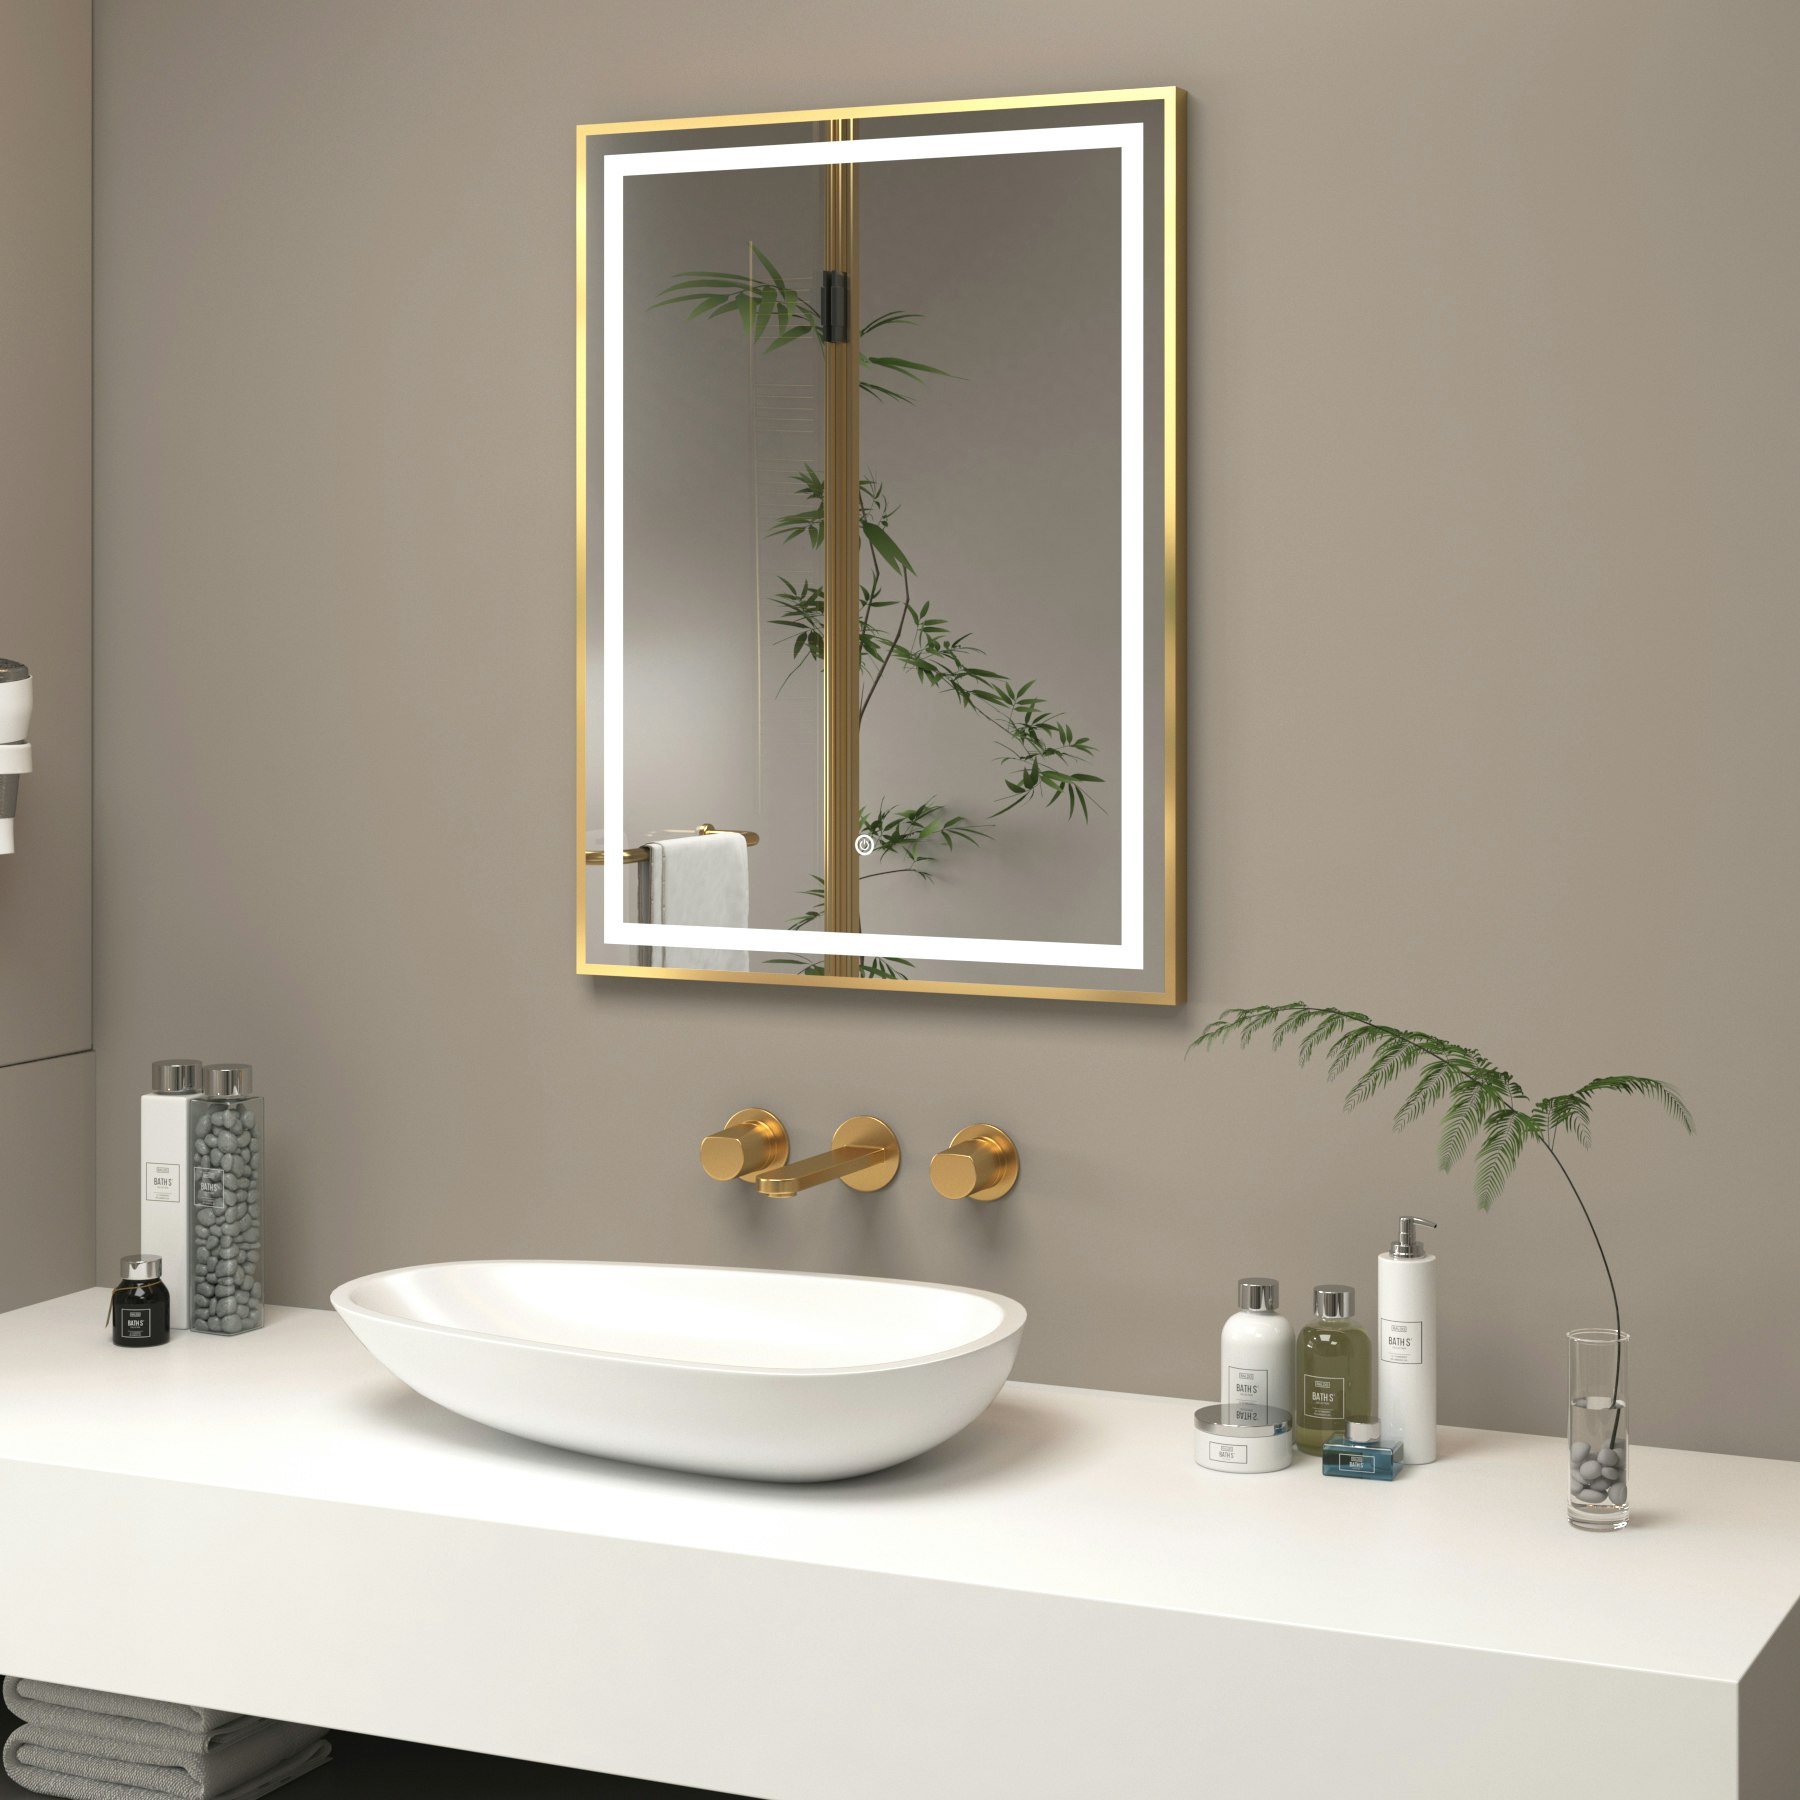 Oslo 600 x 800mm Brushed Brass Aluminum Framed LED Mirror with Demister Pad & Touch Sensor